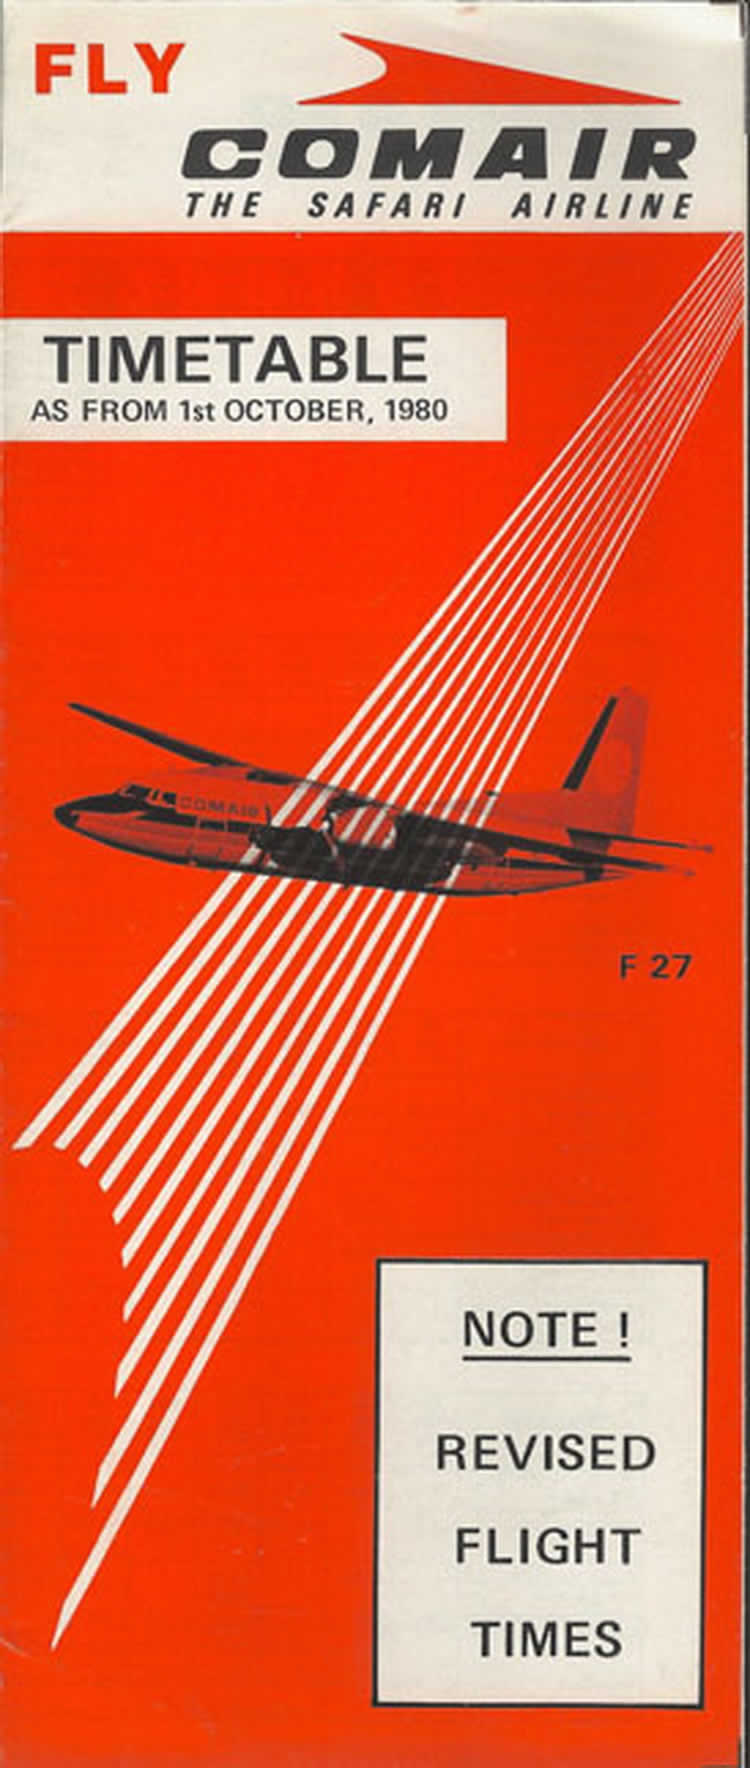 vintage airline timetable for comair